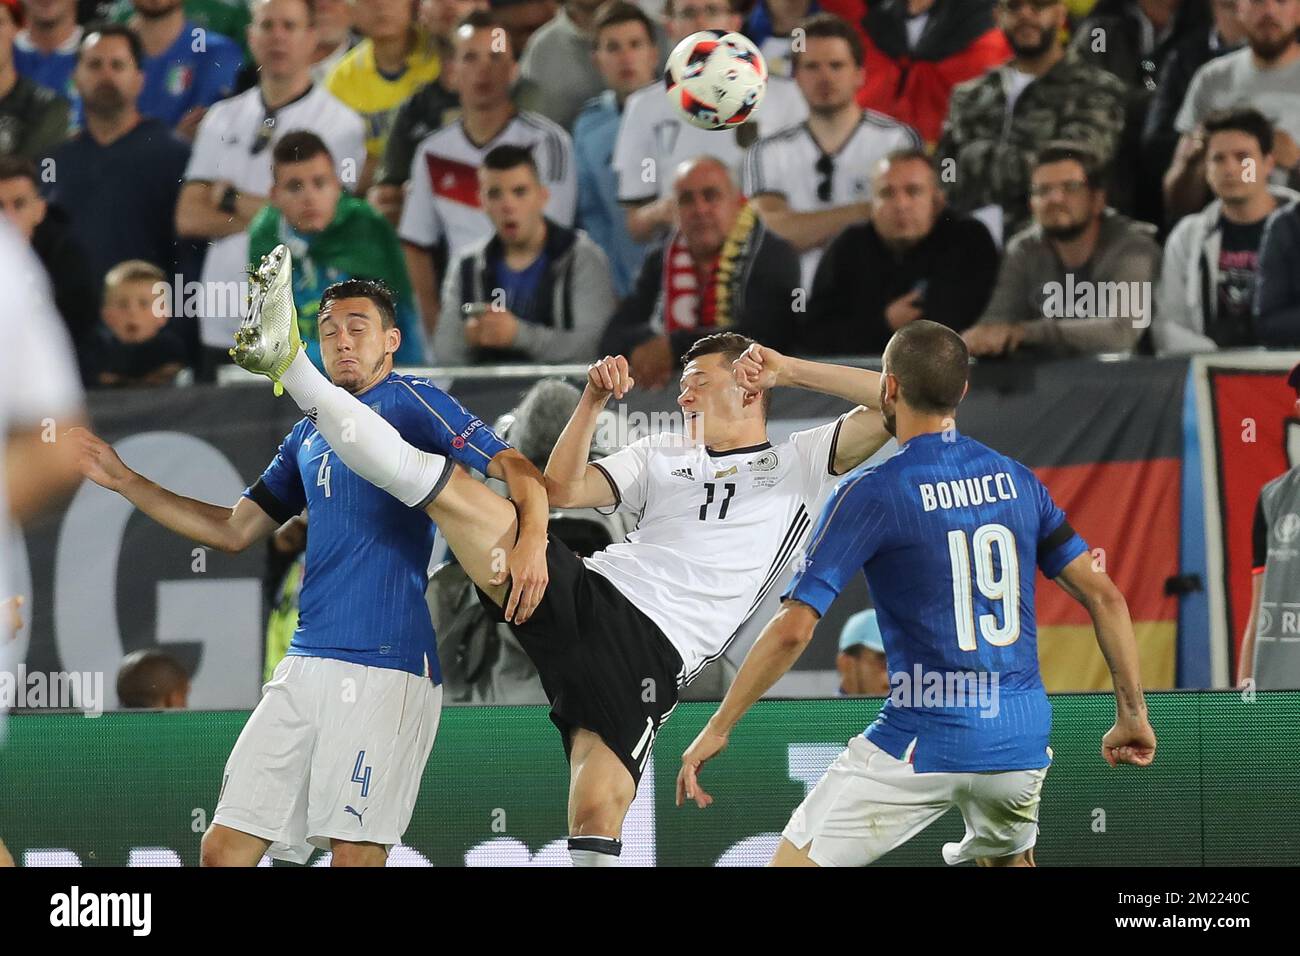 Italy's Matteo Darmian and Germany's Julian Draxler fight for the ball during a soccer game between German team and Italian team, in the quarter-finals of the UEFA Euro 2016 European Championships, on Friday 01 July 2016, in Bordeaux, France.  Stock Photo